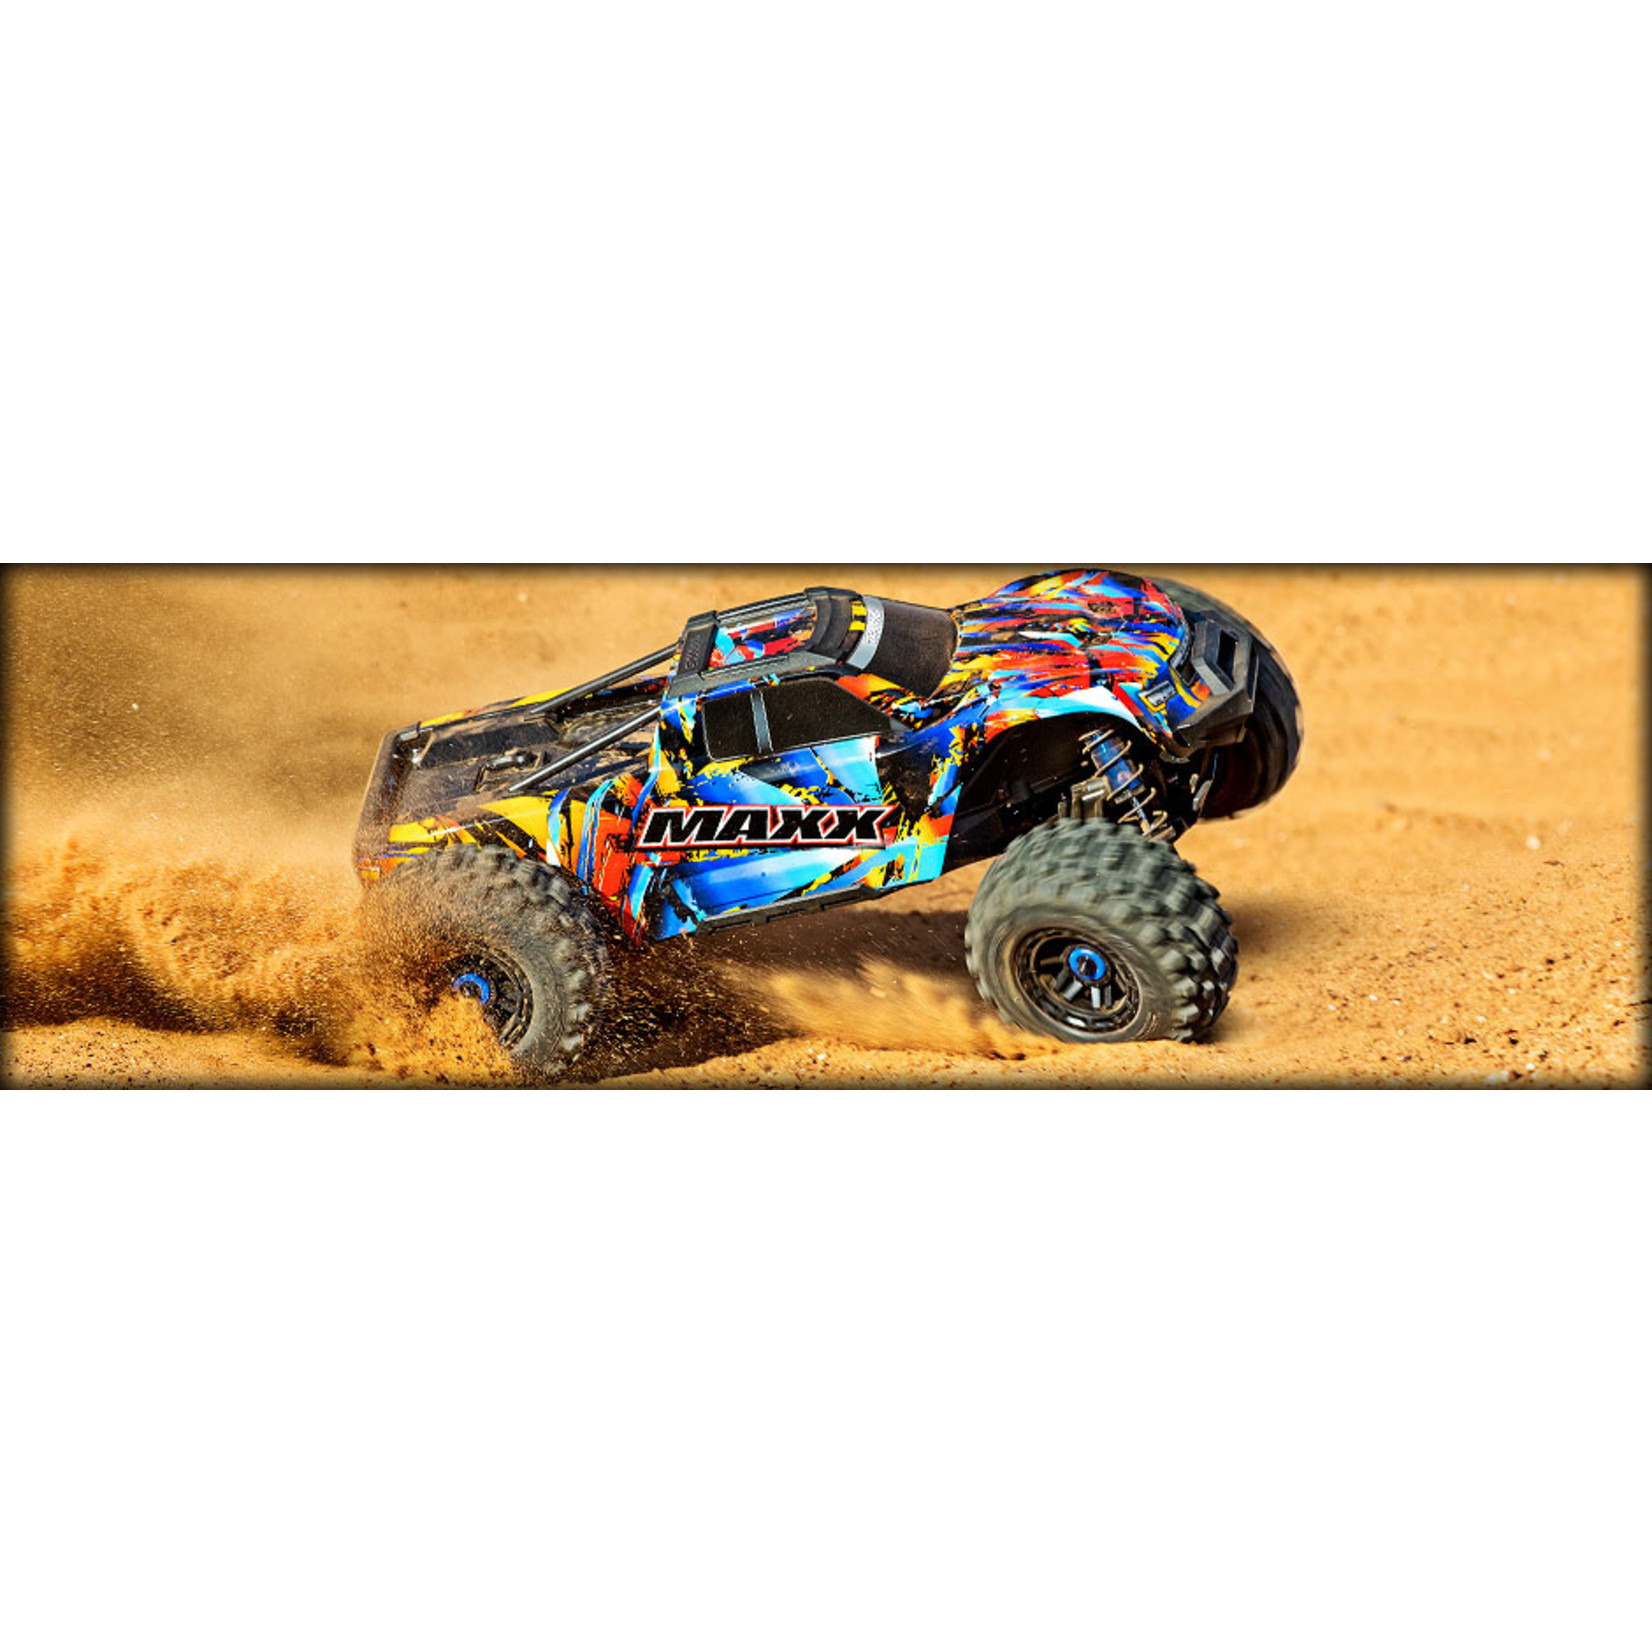 Traxxas 89086-4-YLW Maxx®: 1/10 Scale 4WD Brushless Electric Monster Truck with TQi™ Traxxas Link™